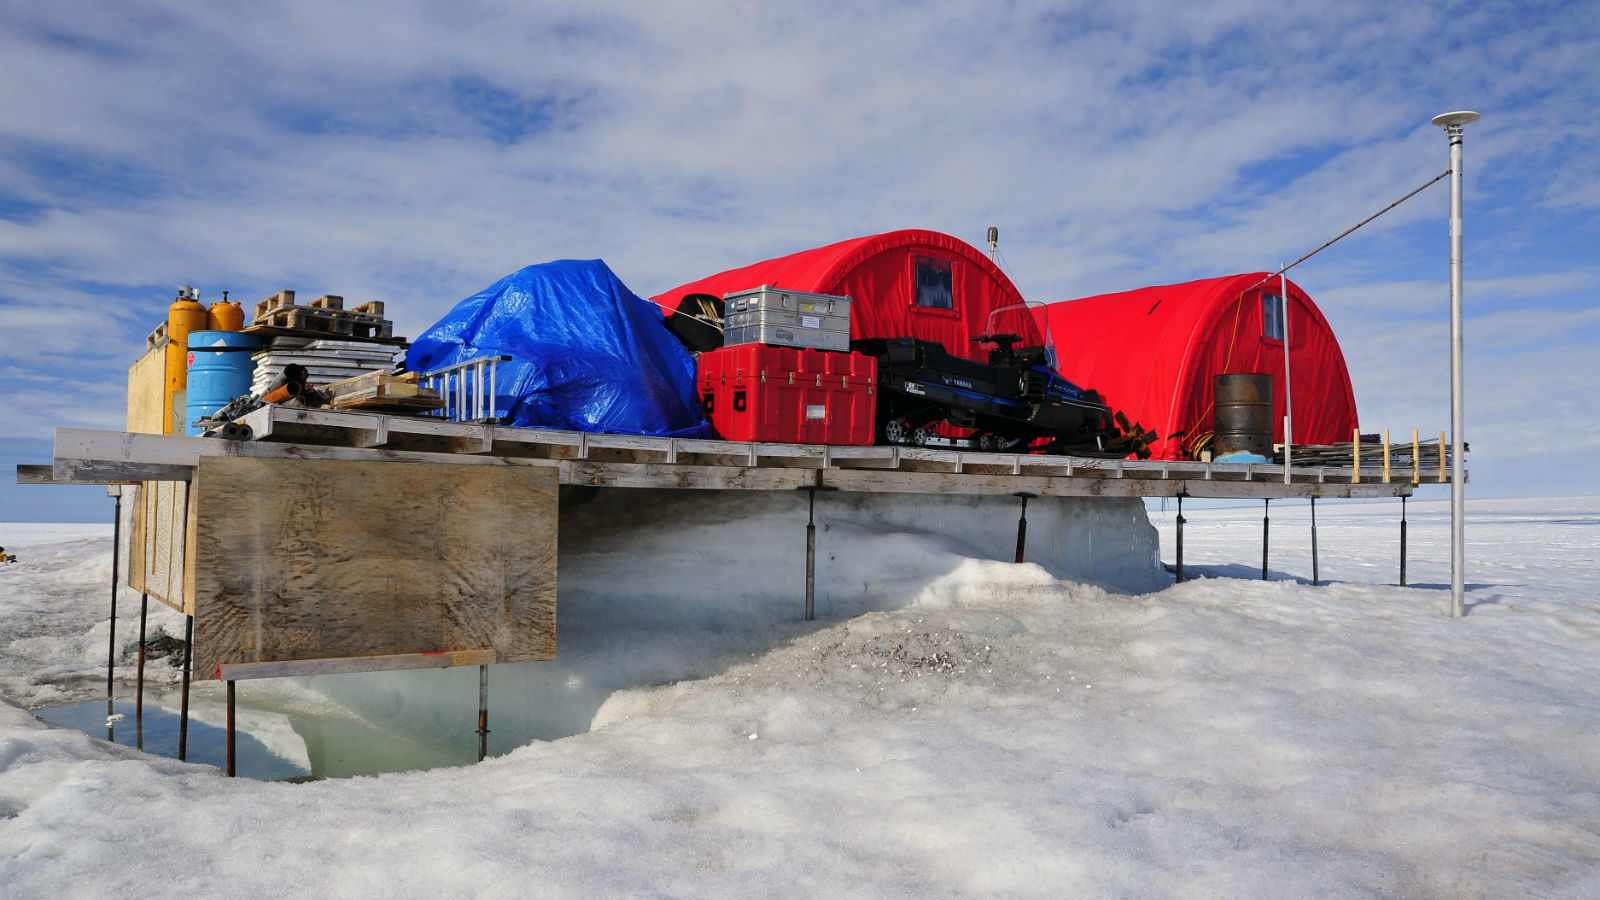 Swiss Camp on the Greenland Ice Sheet